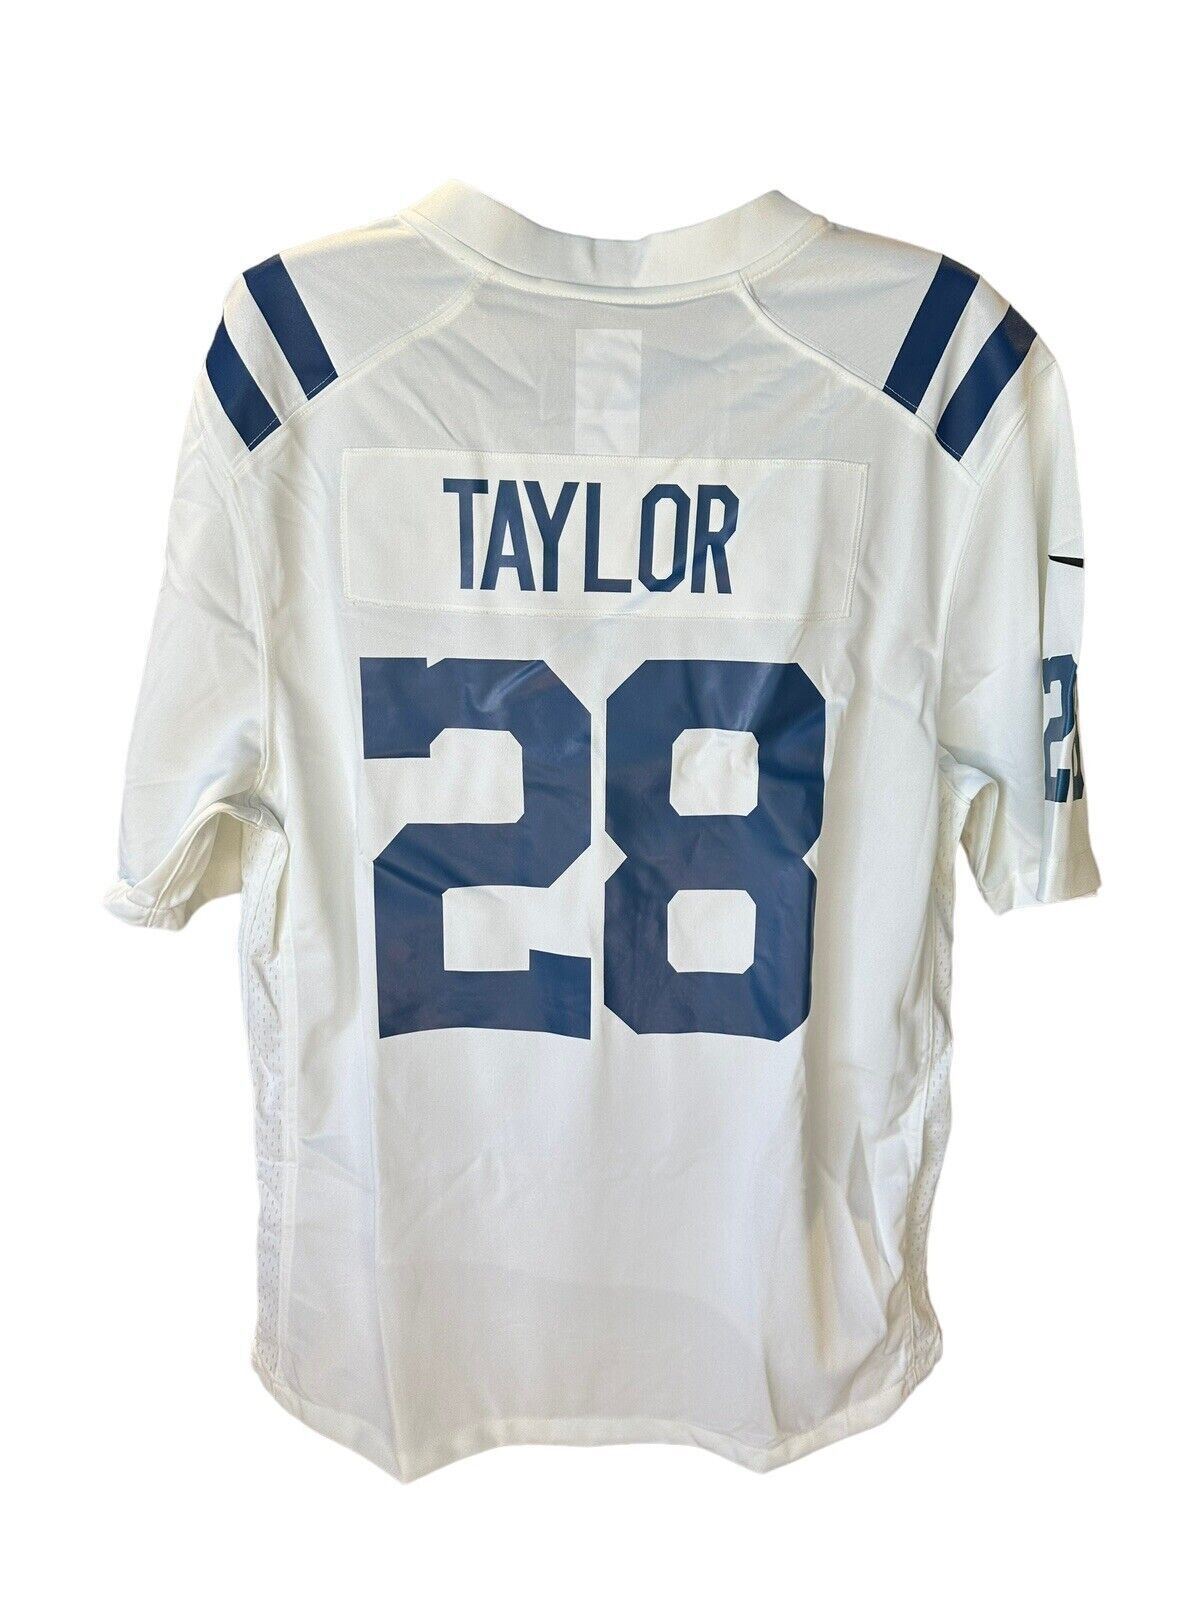 Nike NFL Indianapolis Colts Jersey TAYLOR 28 Mens Large